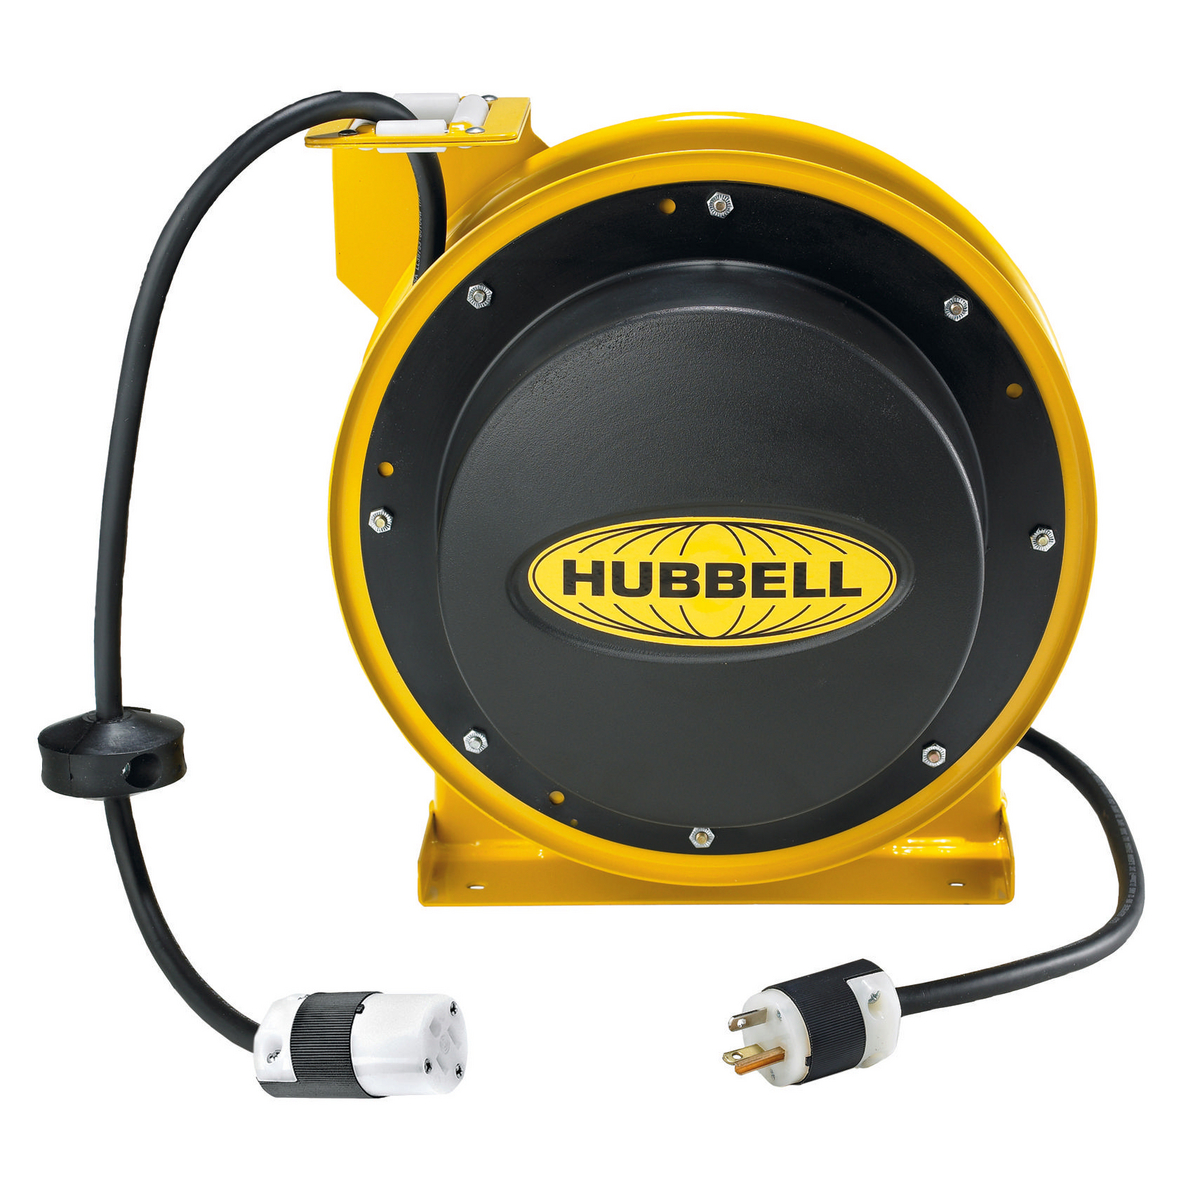 HUBBELL HBL45123C Industrial Reels Industrial Cord Reel with